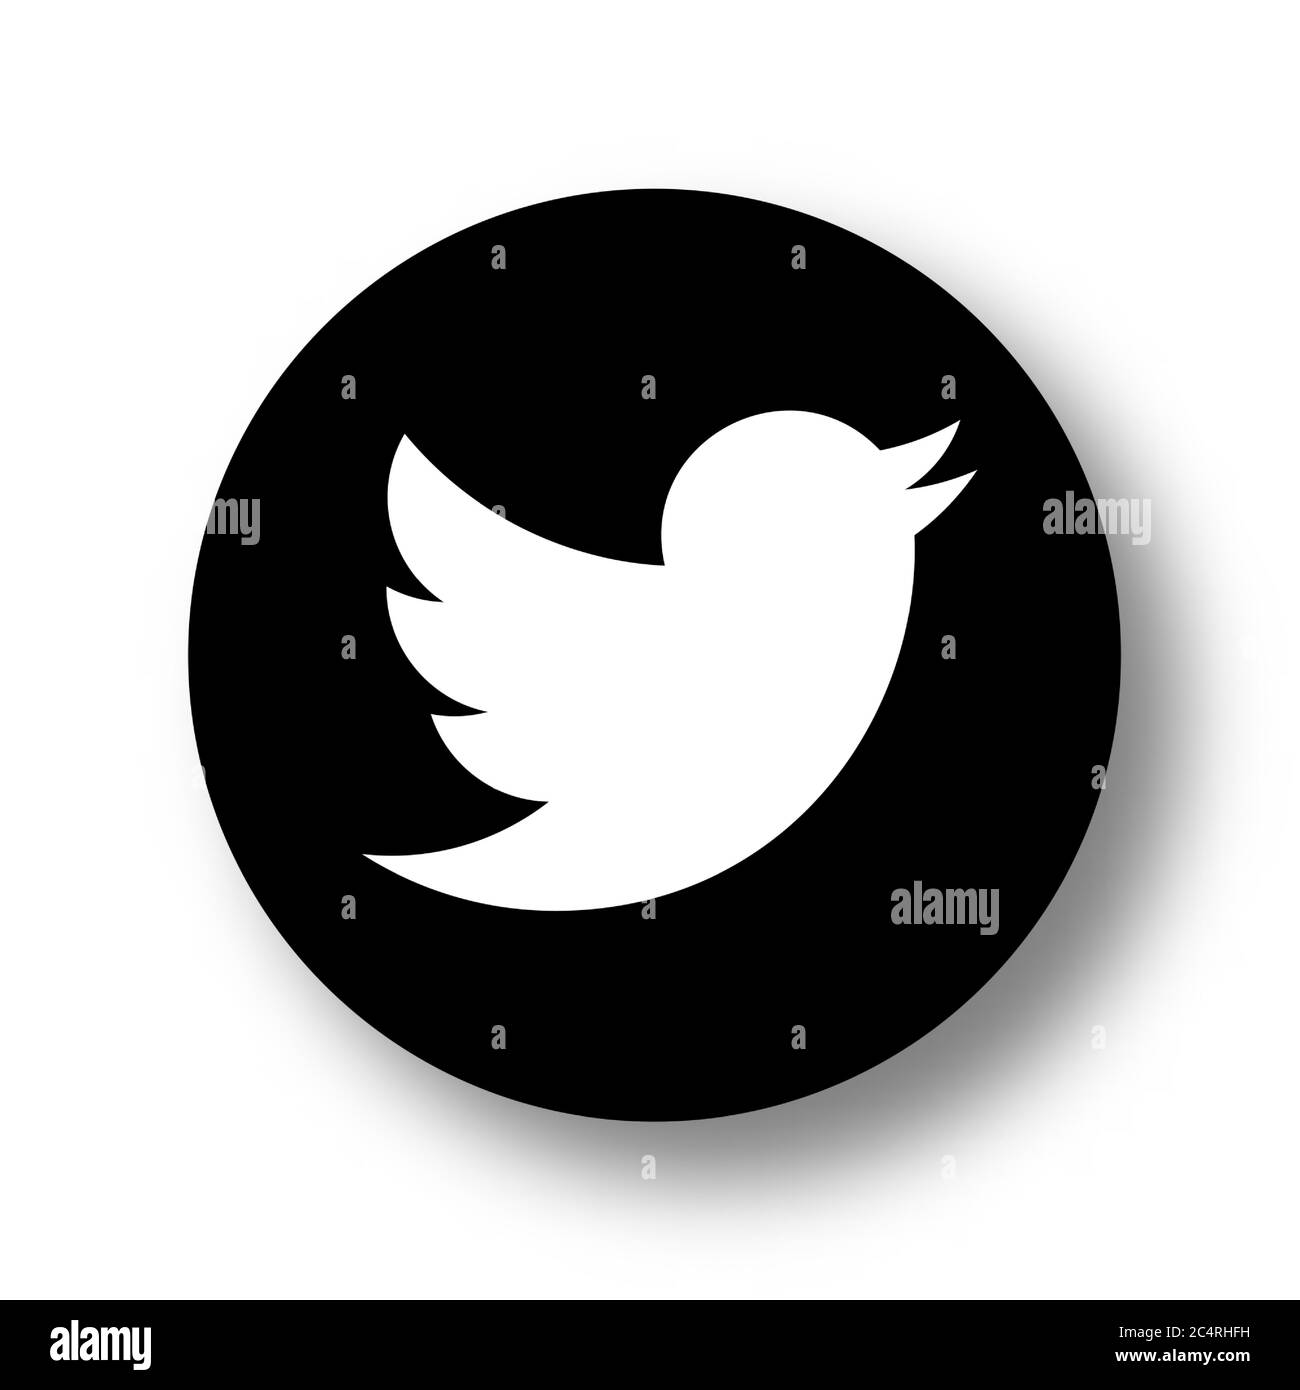 VORONEZH, RUSSIA - JANUARY 31, 2020: Twitter logo black round icon with soft shadow Stock Vector